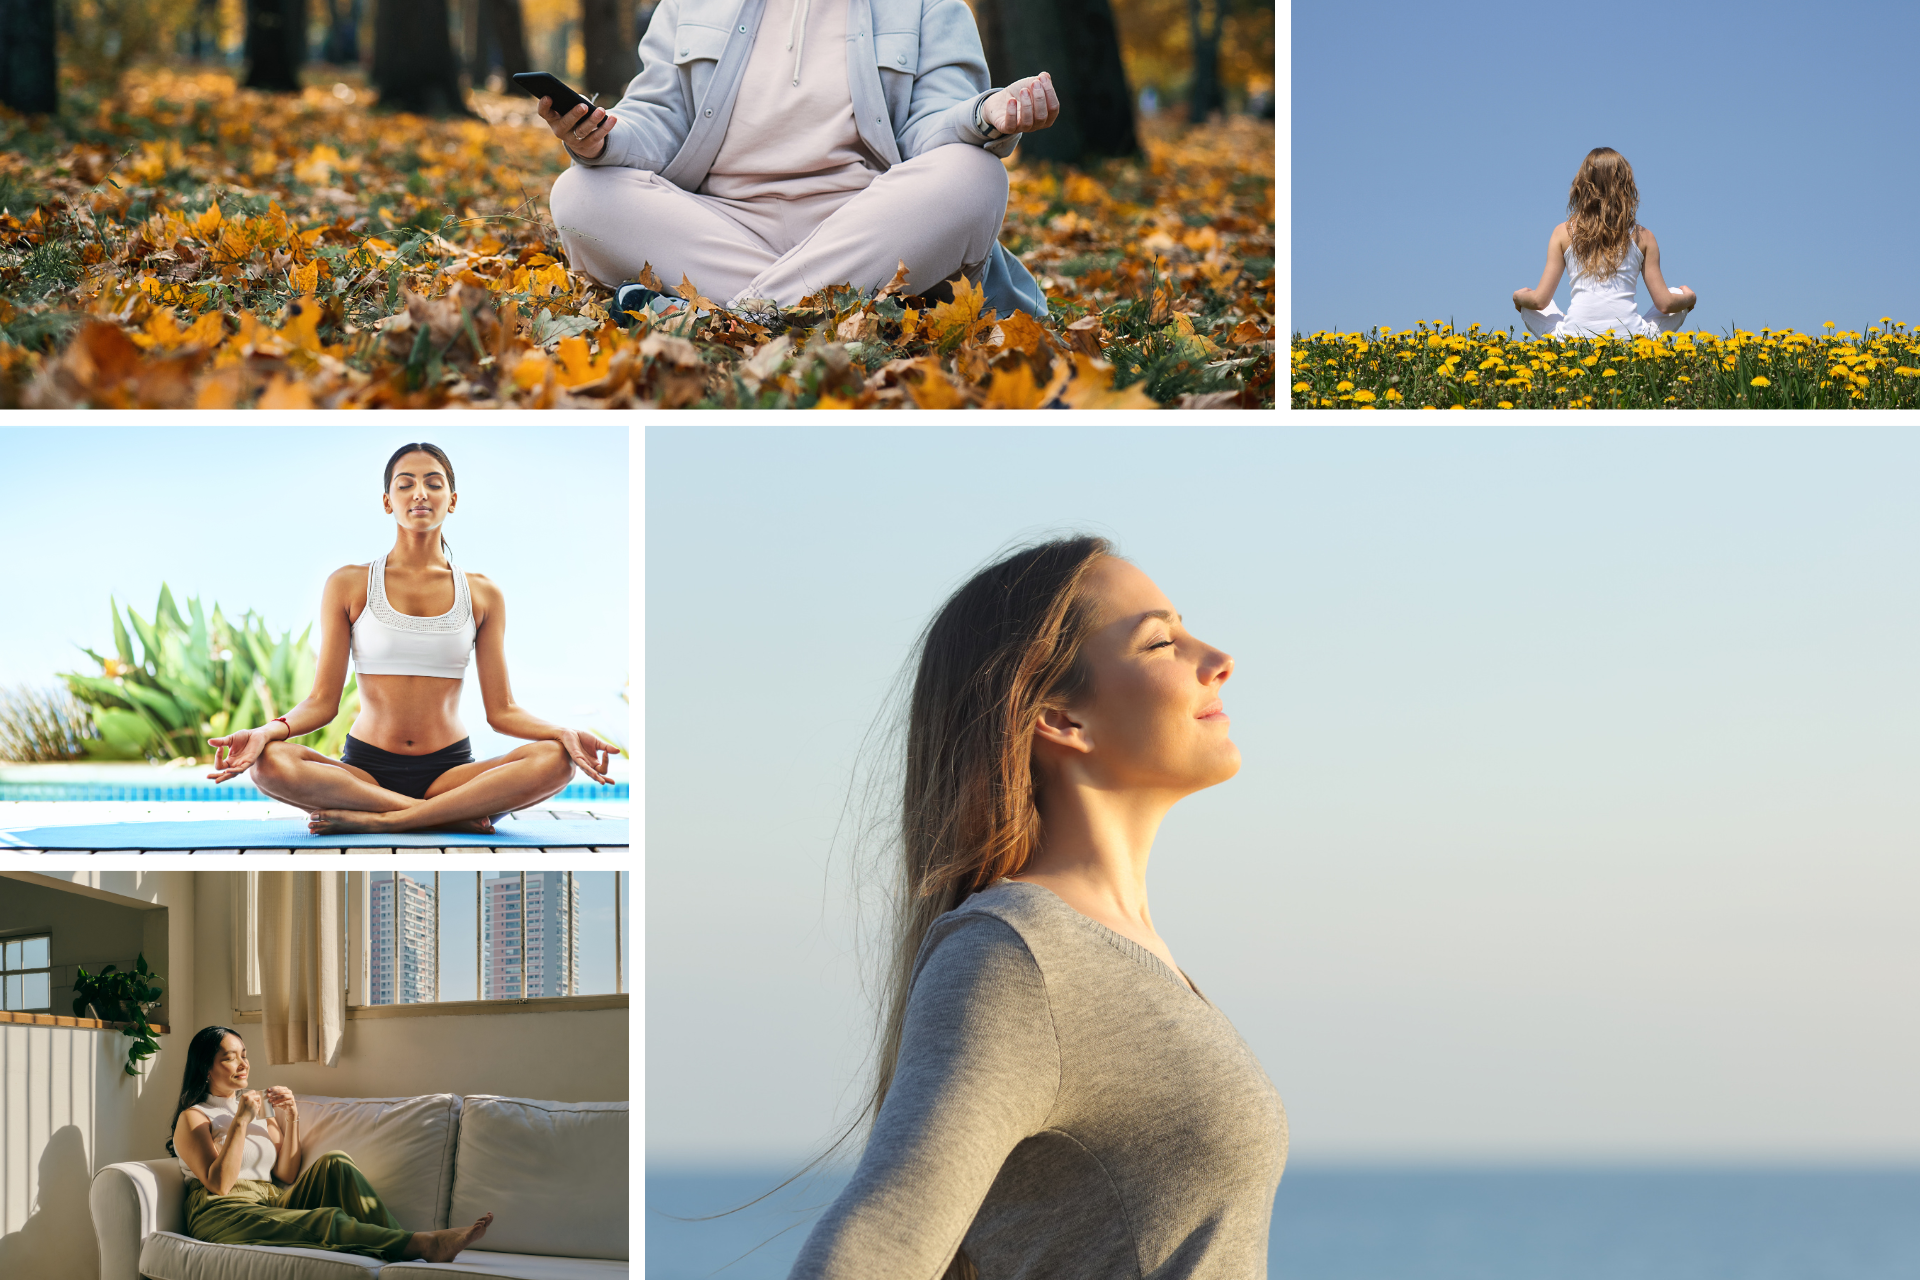 An image showing Mindfulness and Meditation Activities to Calm the Mind